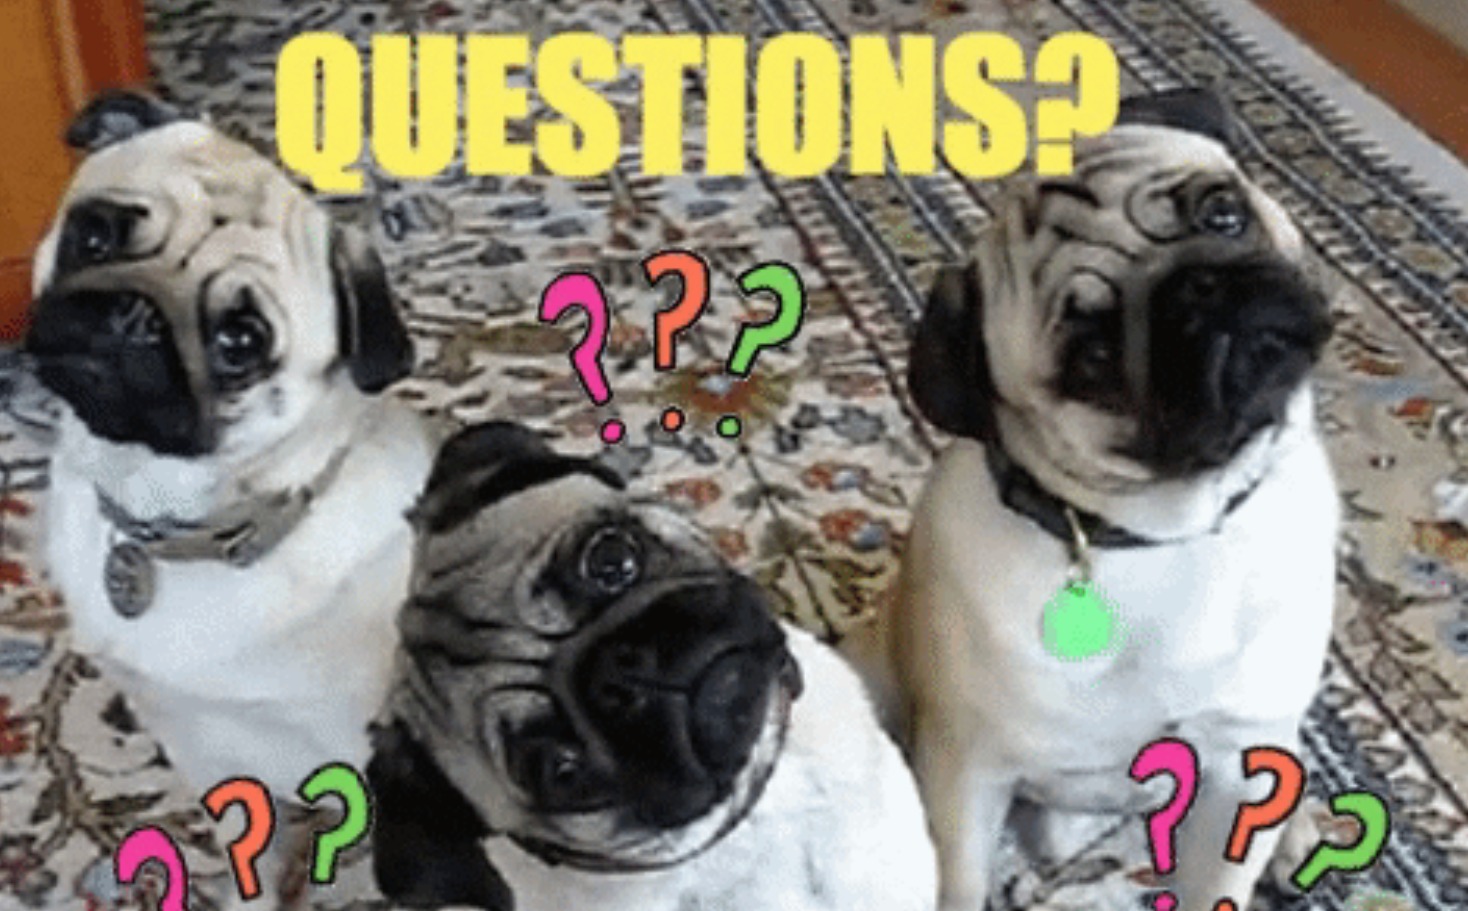 Pugs asking questions.